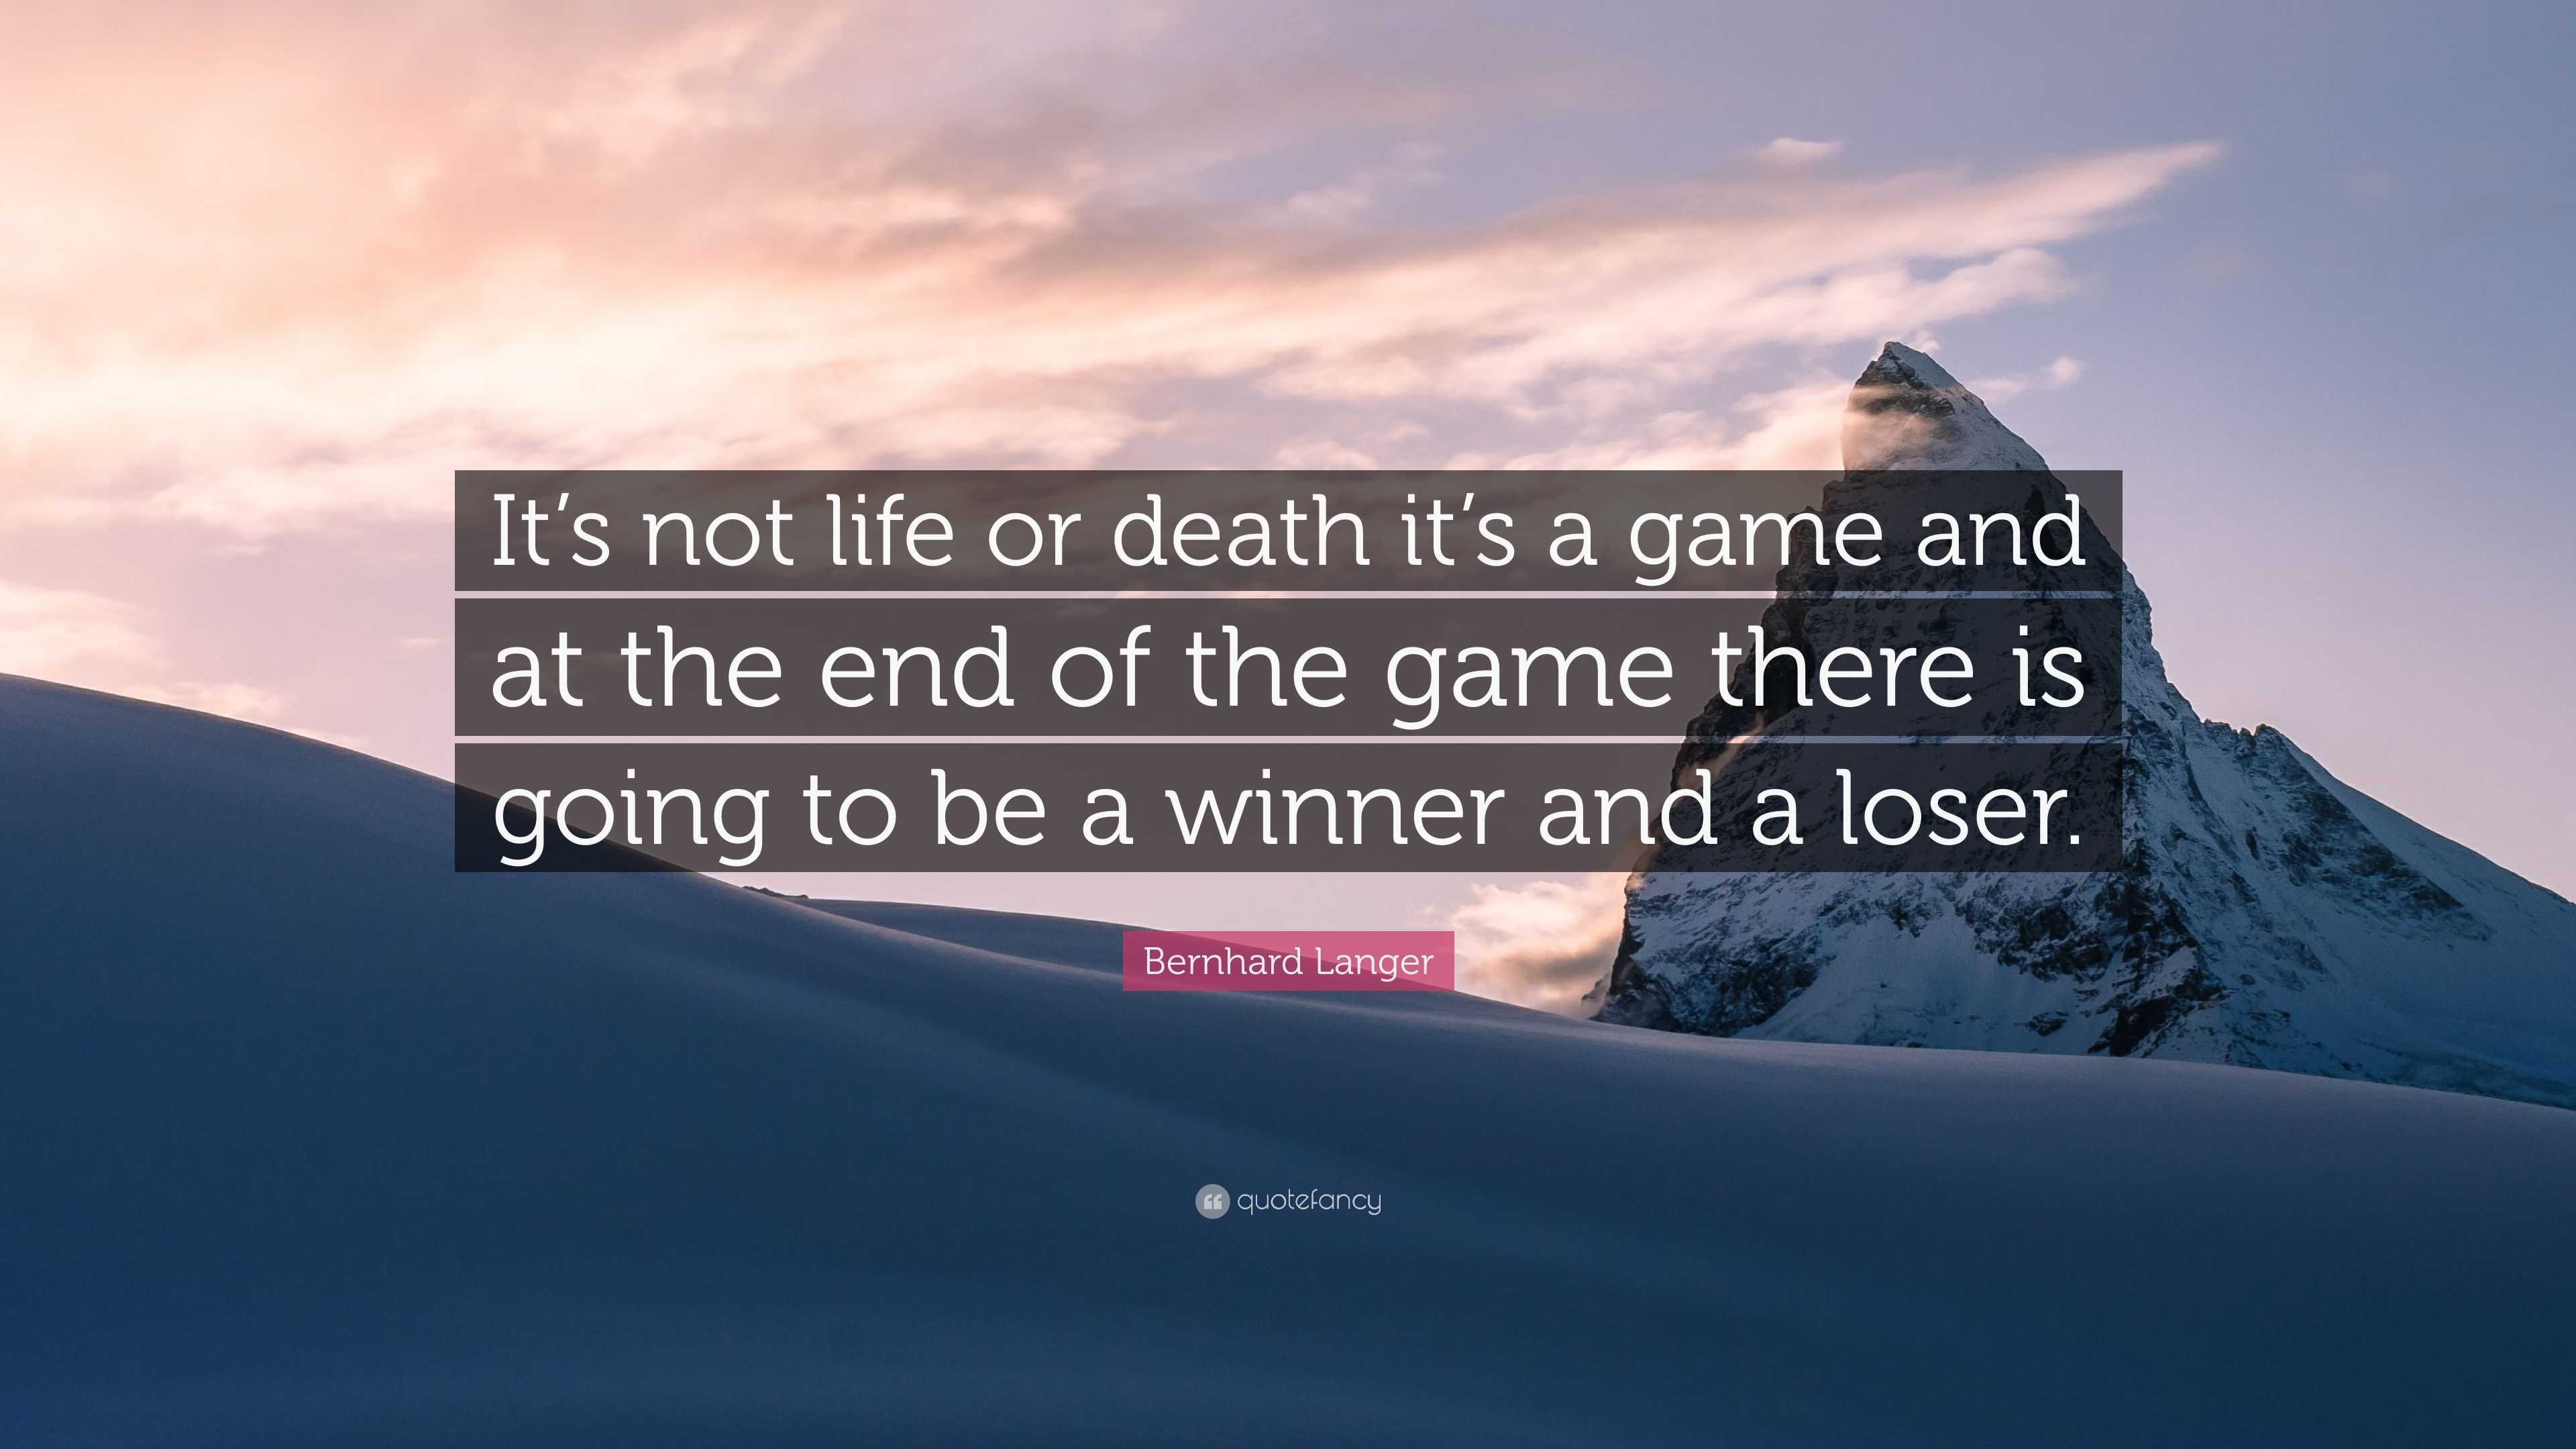 Bernhard Langer Quote: “It's not life or death it's a game and at the end of